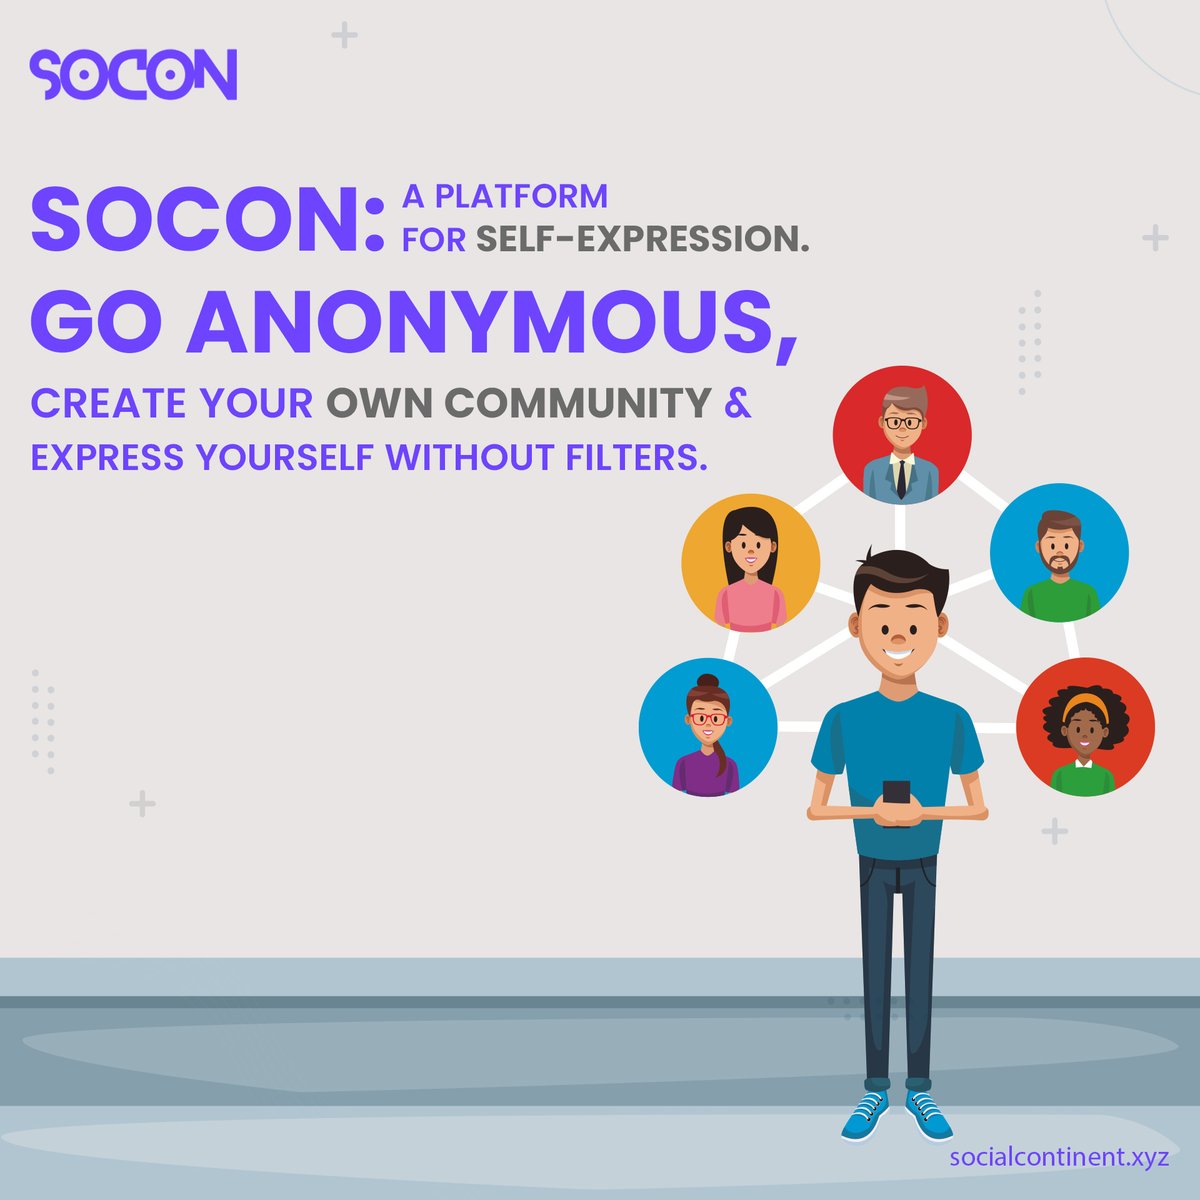 SOCON Social App!📲 Where authenticity meets anonymity. Join us and unleash your true self, free from judgment or filters. It's your space to create, connect, and express without limits. 🚀

#SOCON #Anonymous #Community #authenticity #freedomofexpression #selfexpression